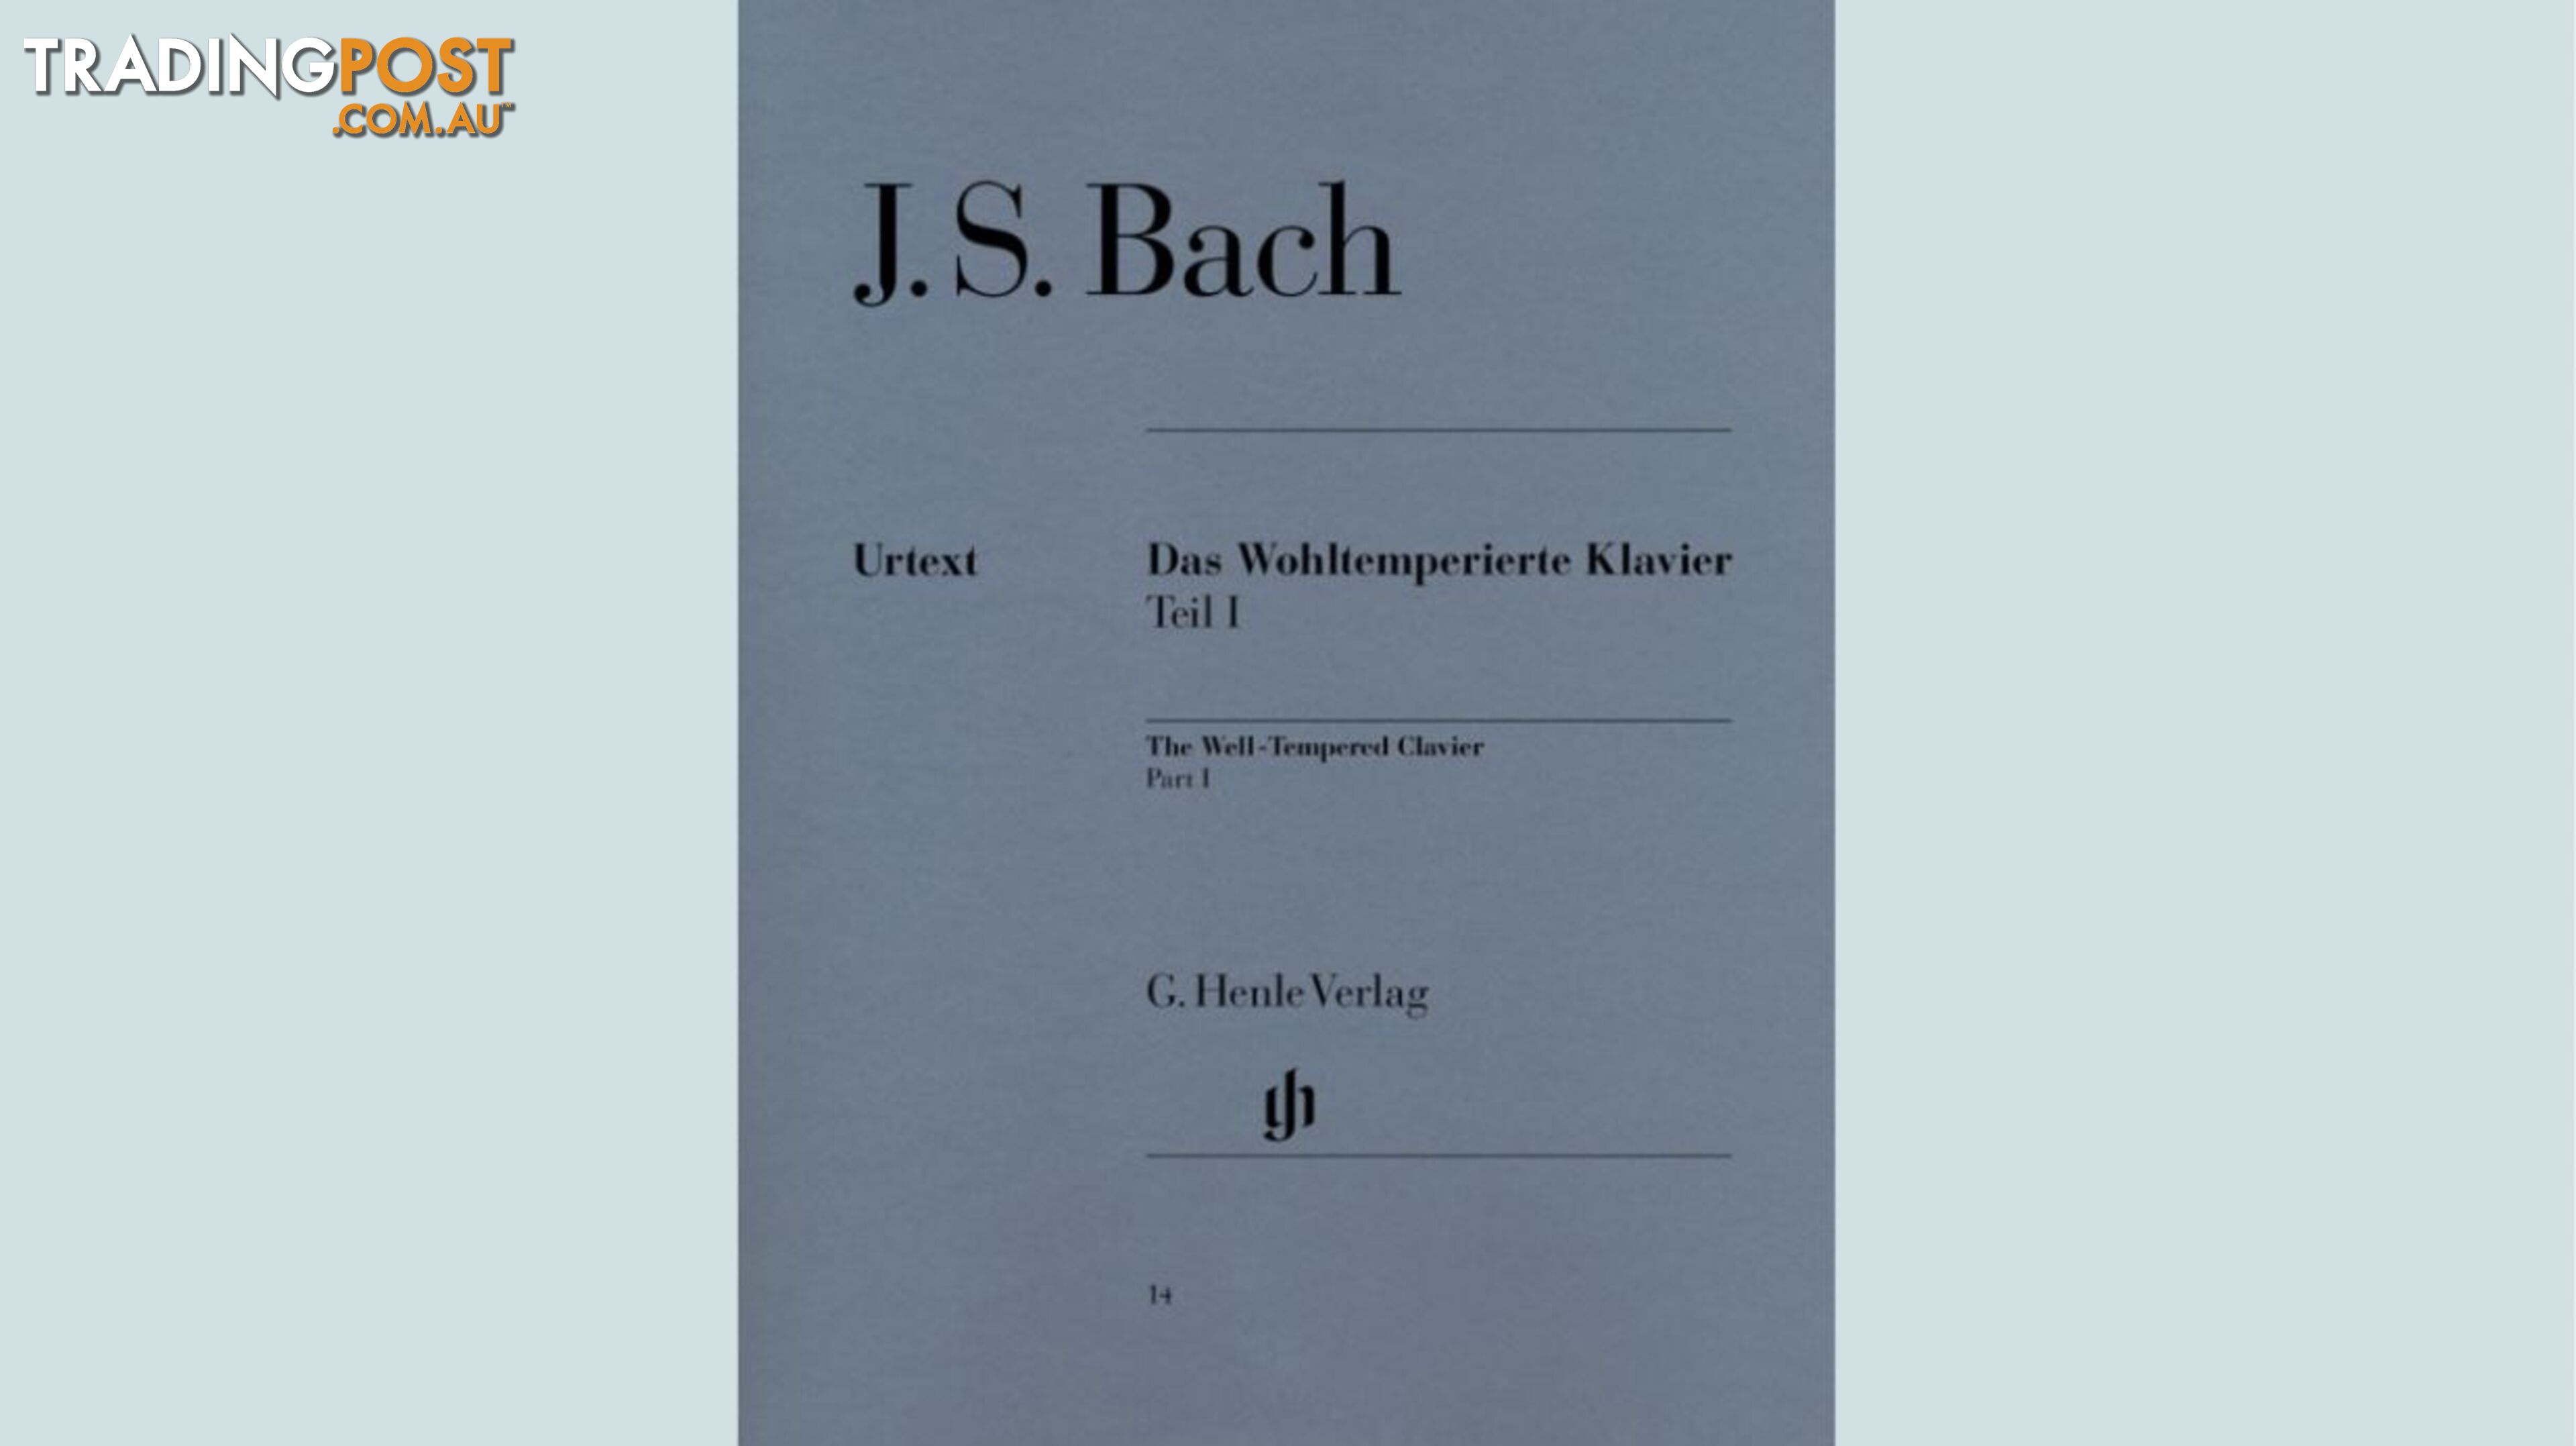 JS Bach  - The Well-Tempered Clavier Part I BWV 846-869 HN014